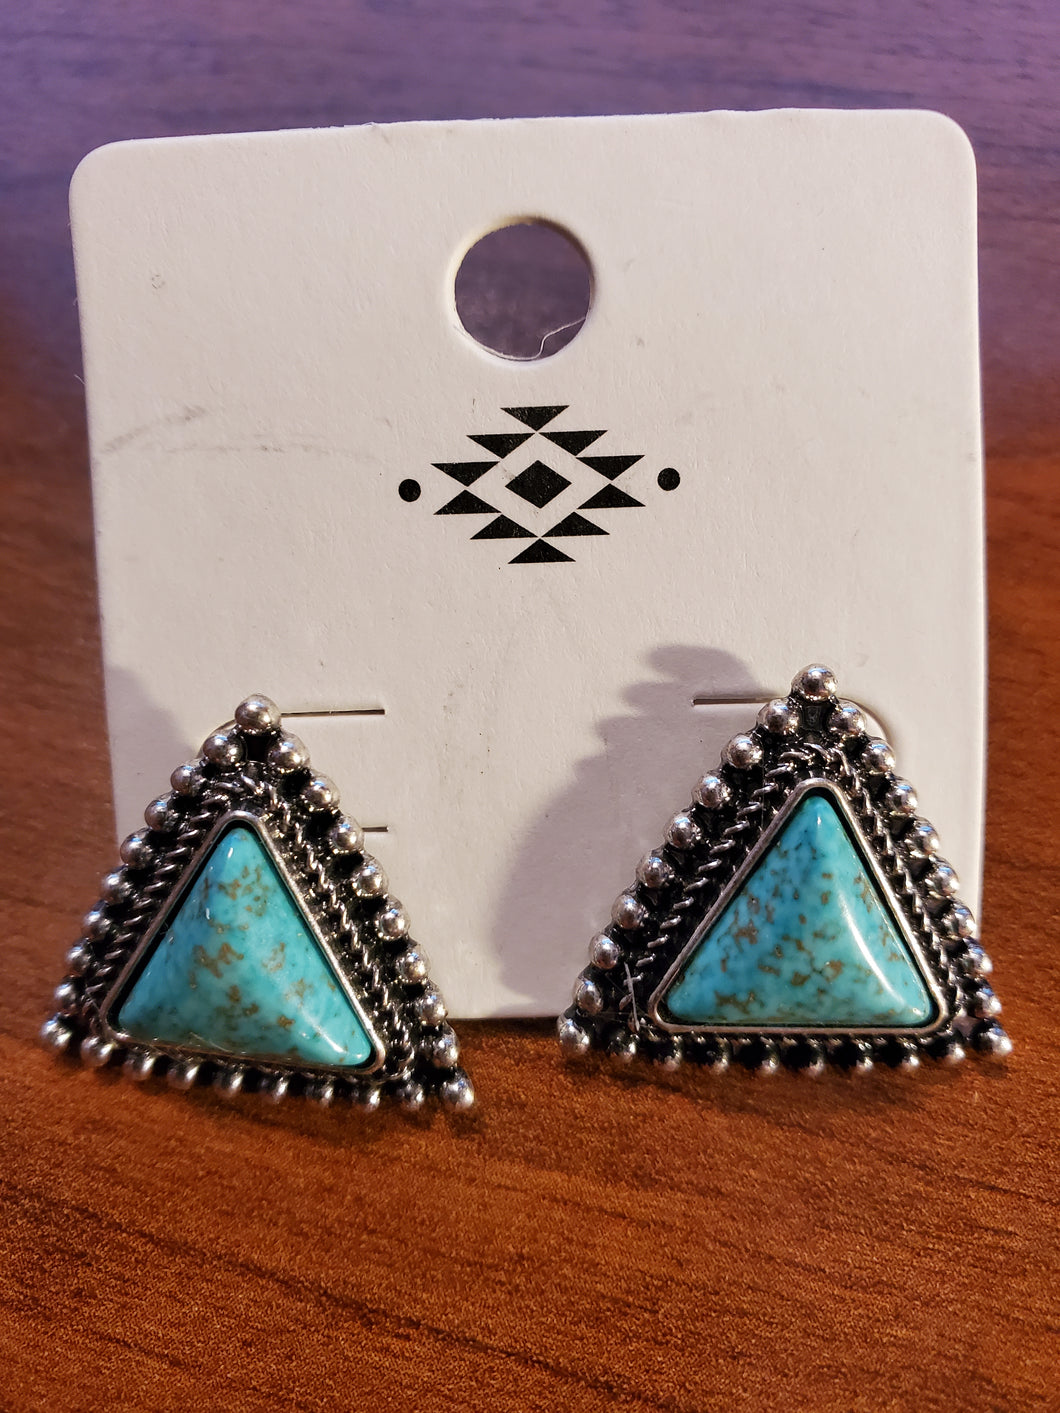 Trinidad Turquoise Triangle Earrings - Unique Inspirations by Tracy and Anna